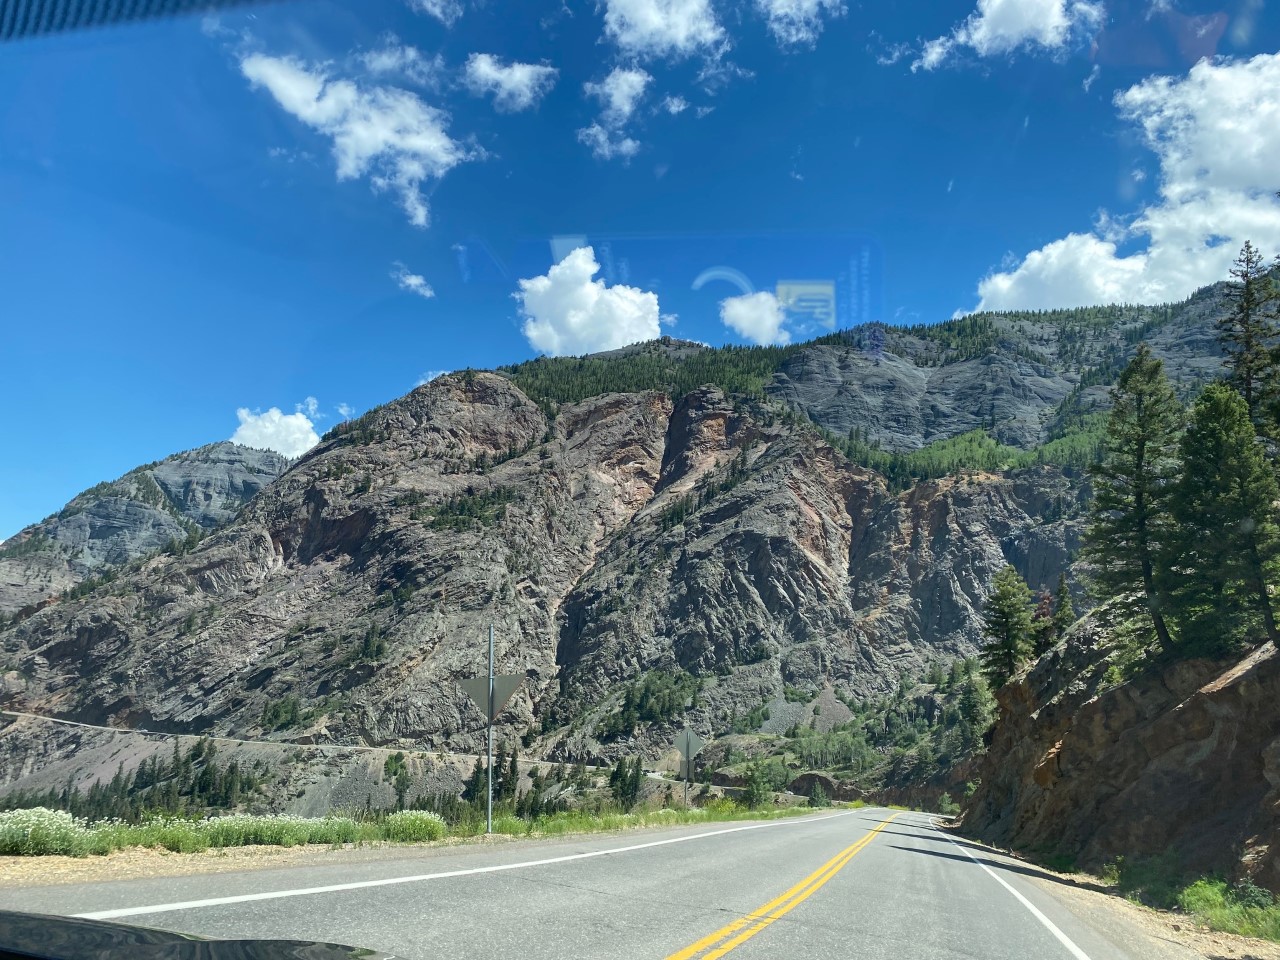 The Million Dollar Highway cuts along the edge of the mountains to Ouray.